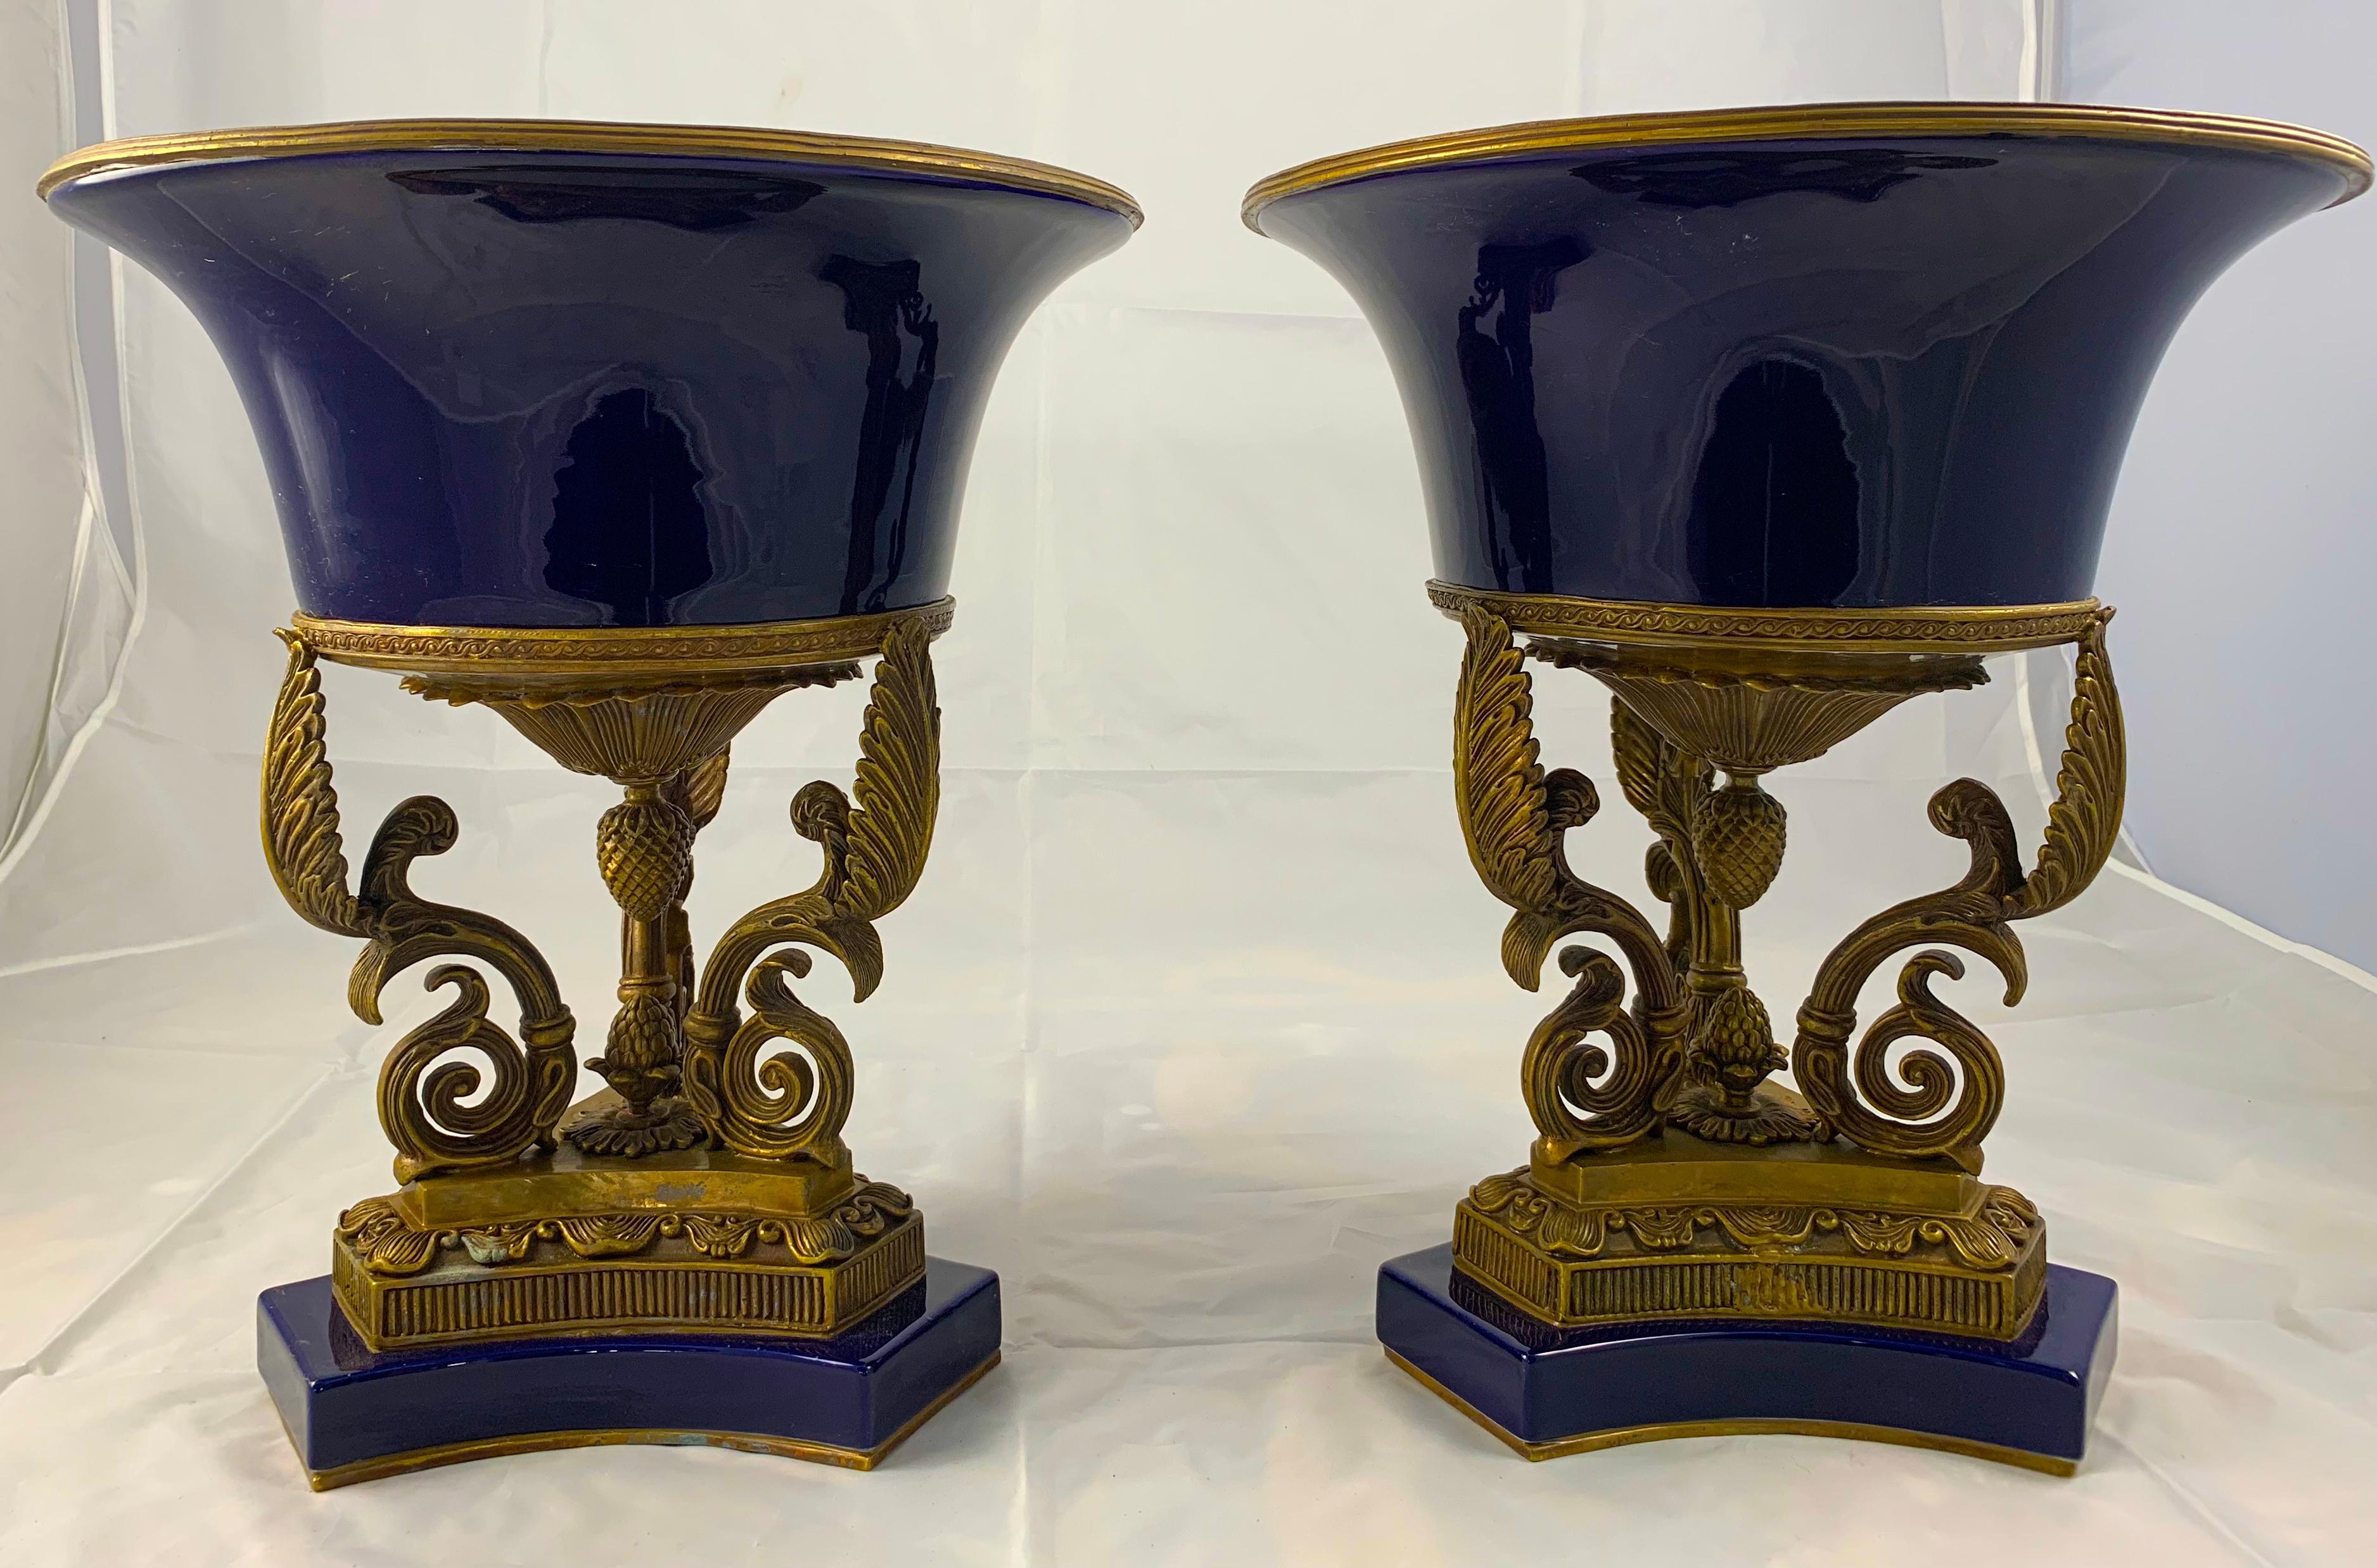 A pair of First Empire style Bleu de roi porcelain and ormolu-mounted urns. Each supported by stylised leafage and scrolls above a tri form base.